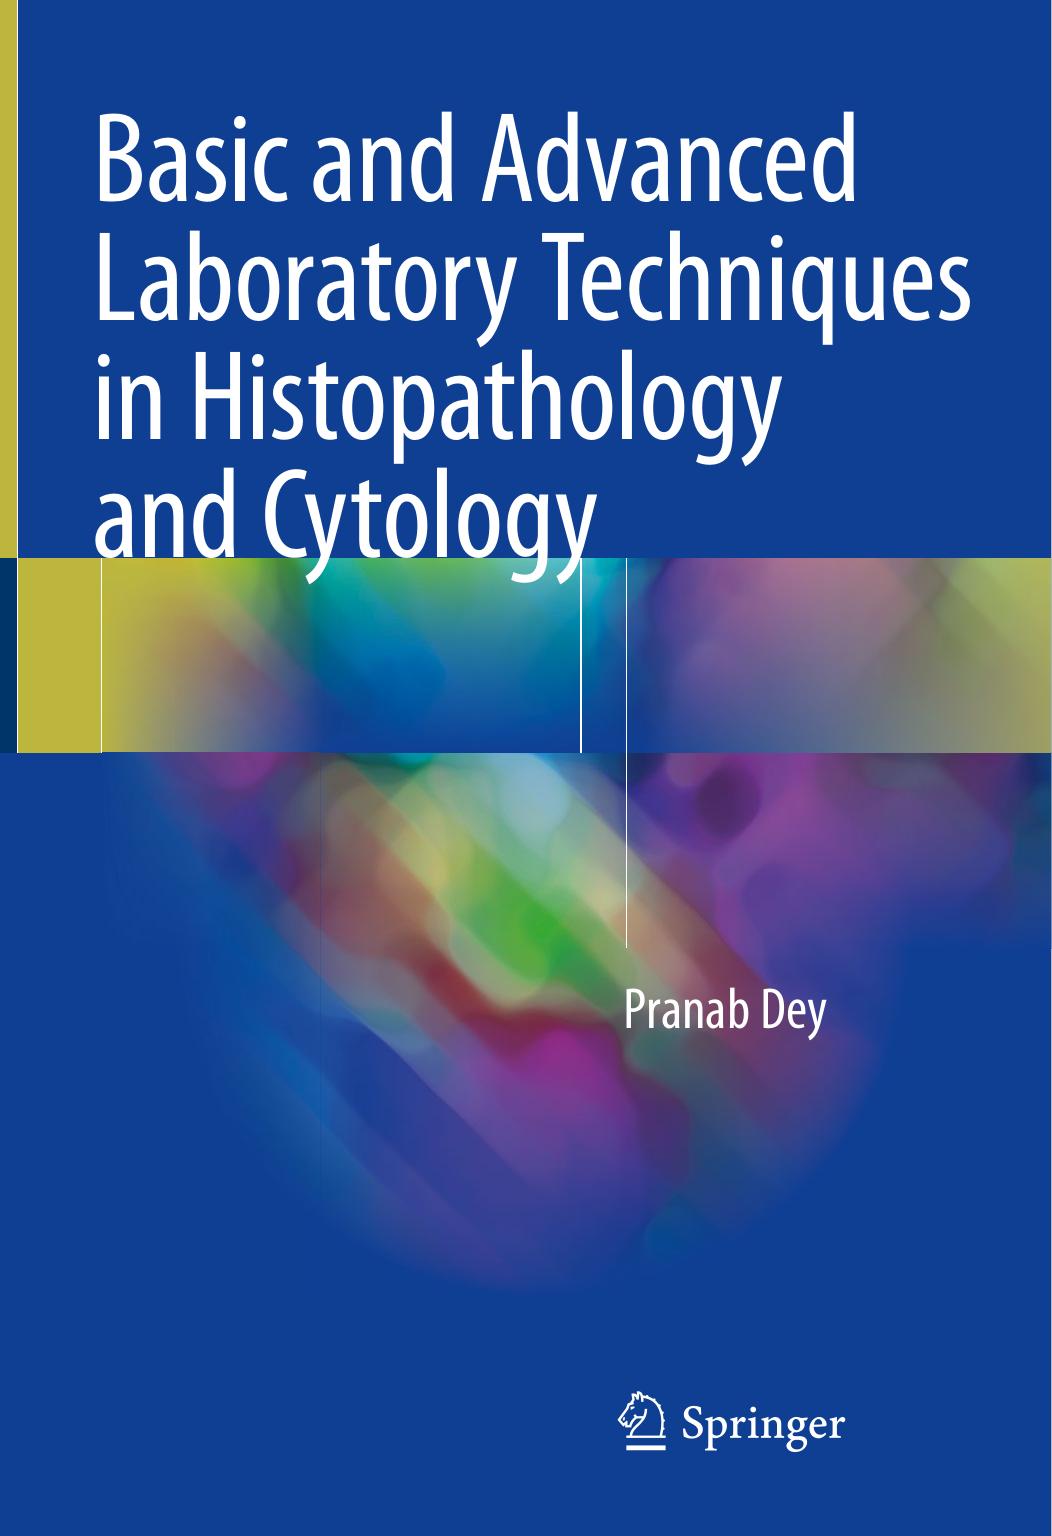 Basic and Advanced Laboratory Techniques in Histopathology and Cytology (2018)